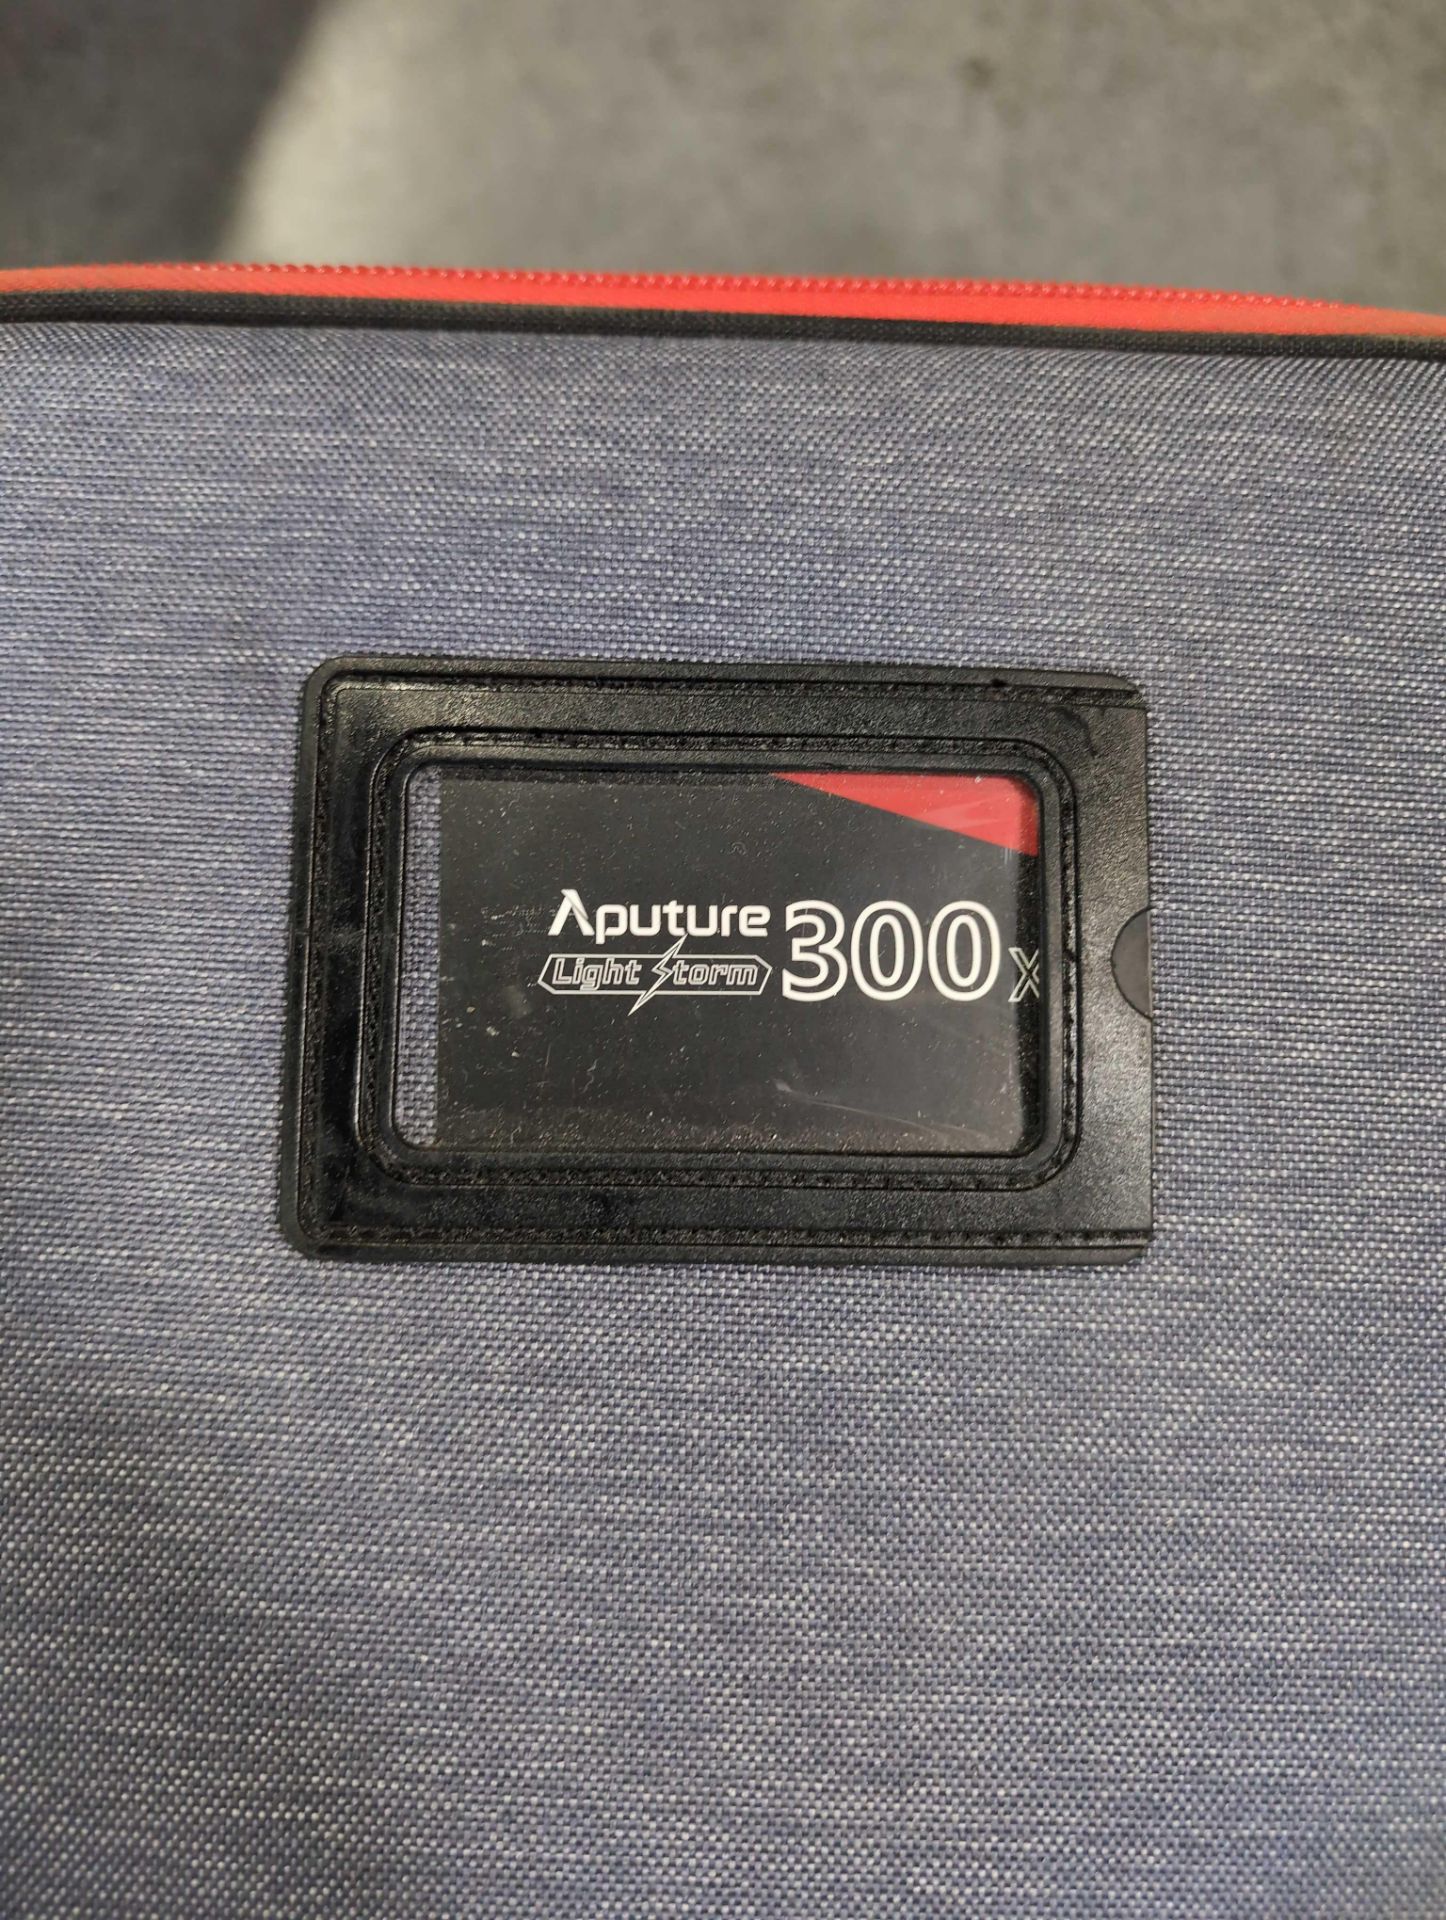 Aputure Light Storm 300x with case - Image 7 of 7